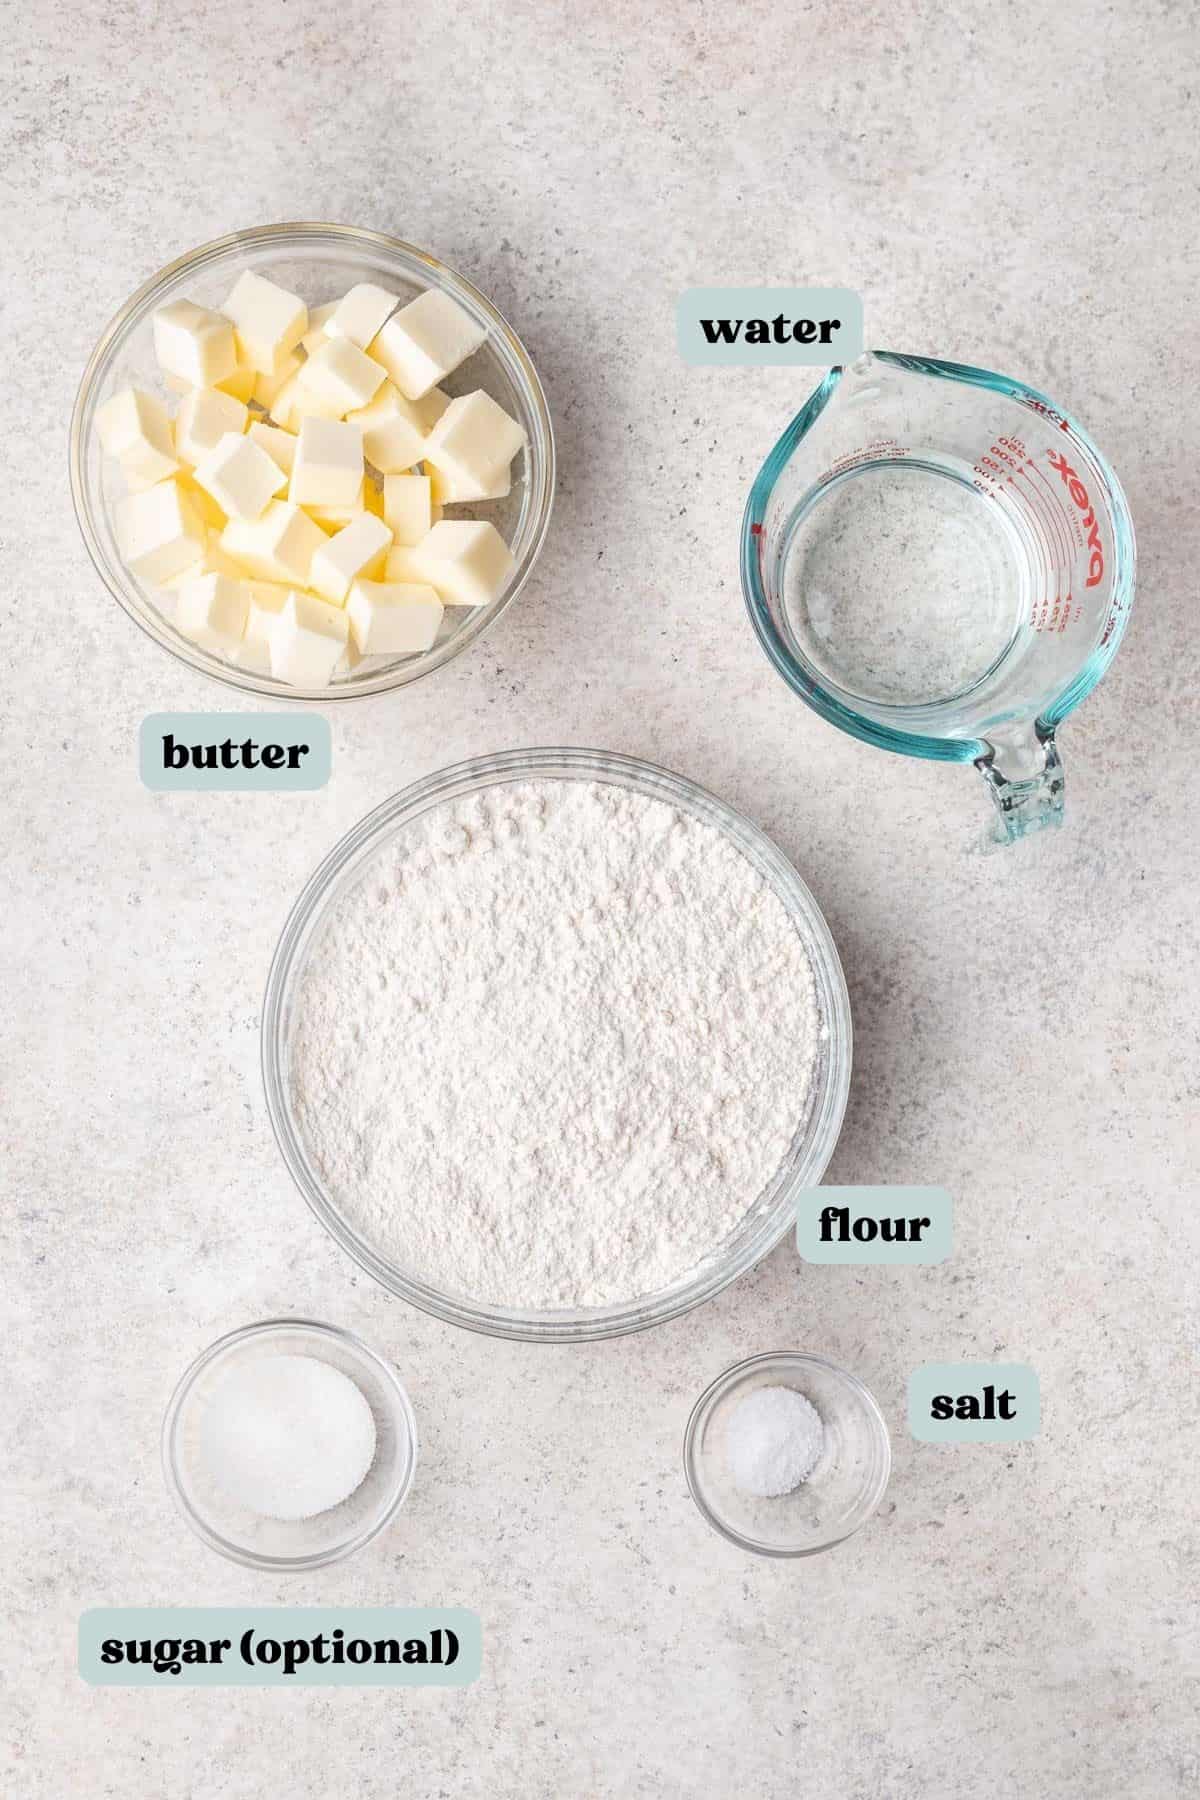 Ingredients you need measured and labeled for homemade pie crust.